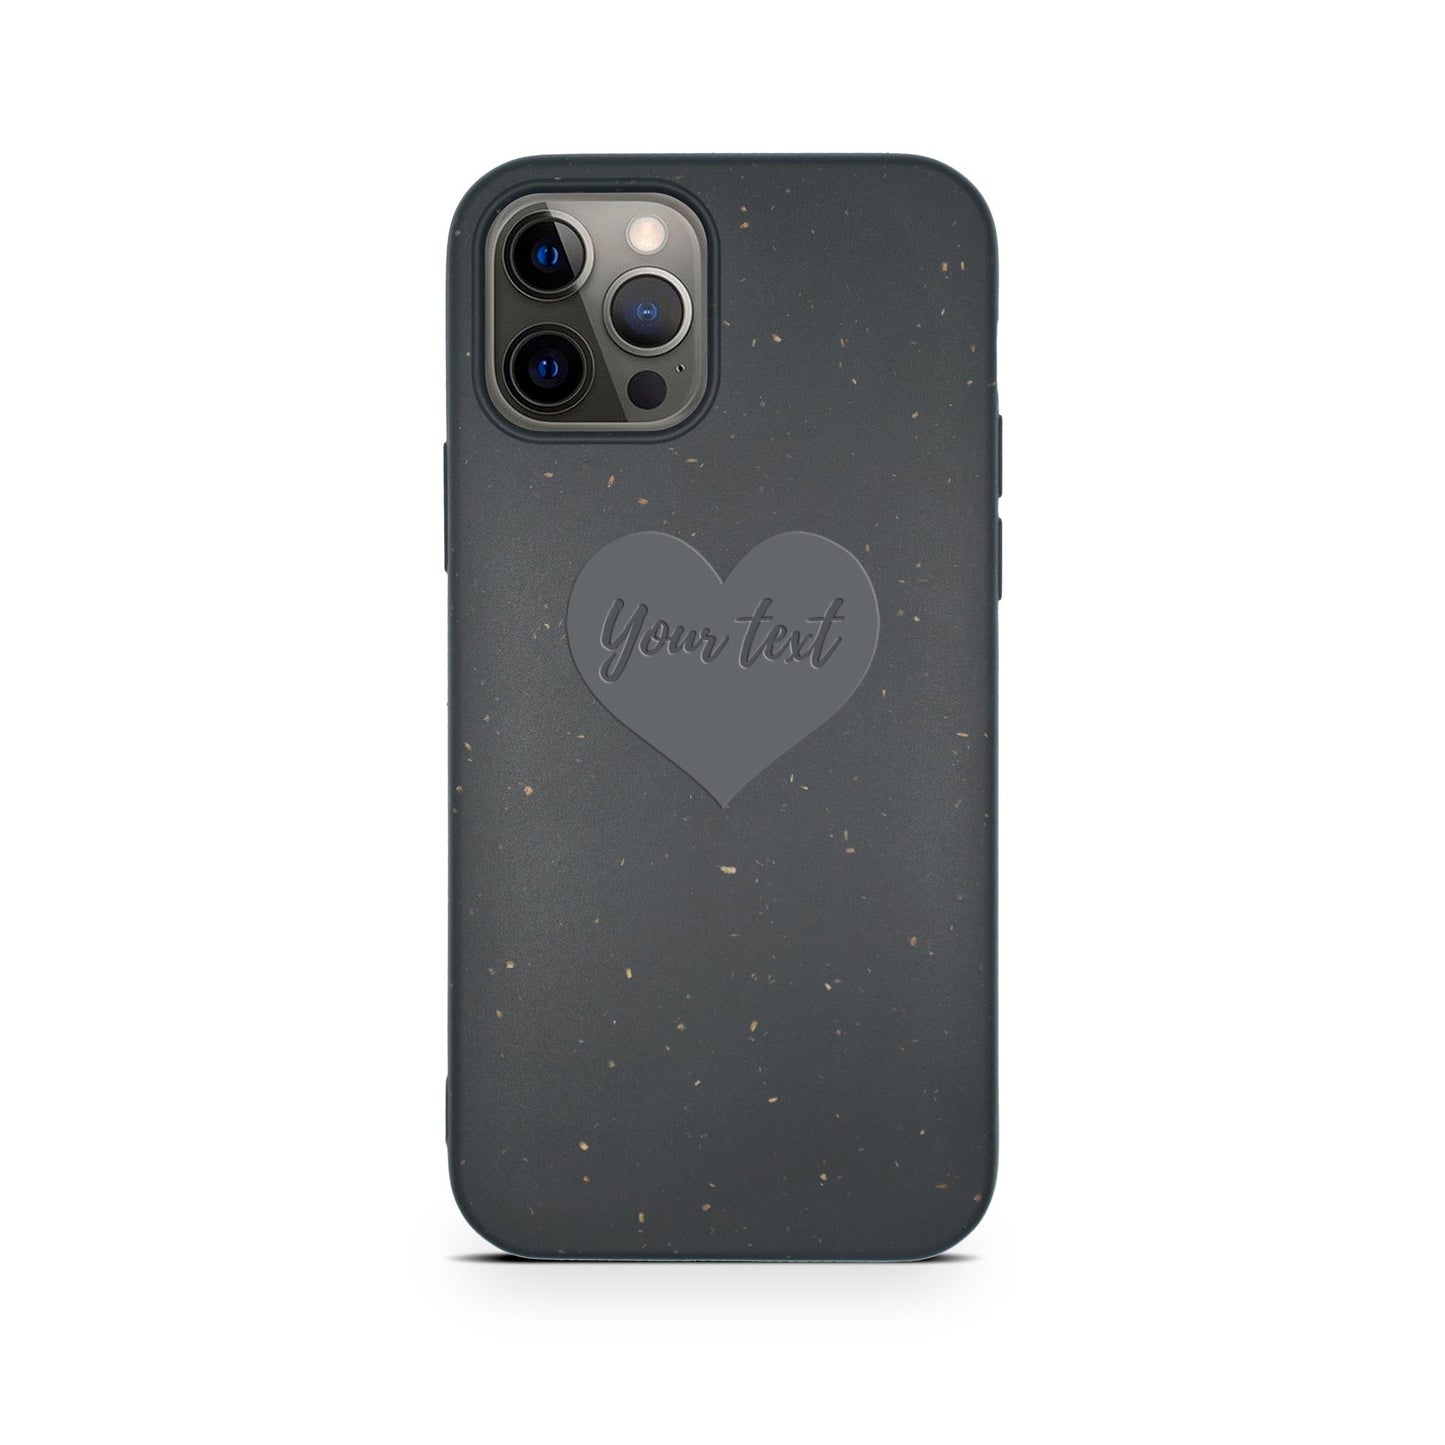 A smartphone with a Tan Lily Biodegradable Personalized iPhone Case in black featuring a heart-shaped area labeled "Your text" and speckles of gold-like particles.